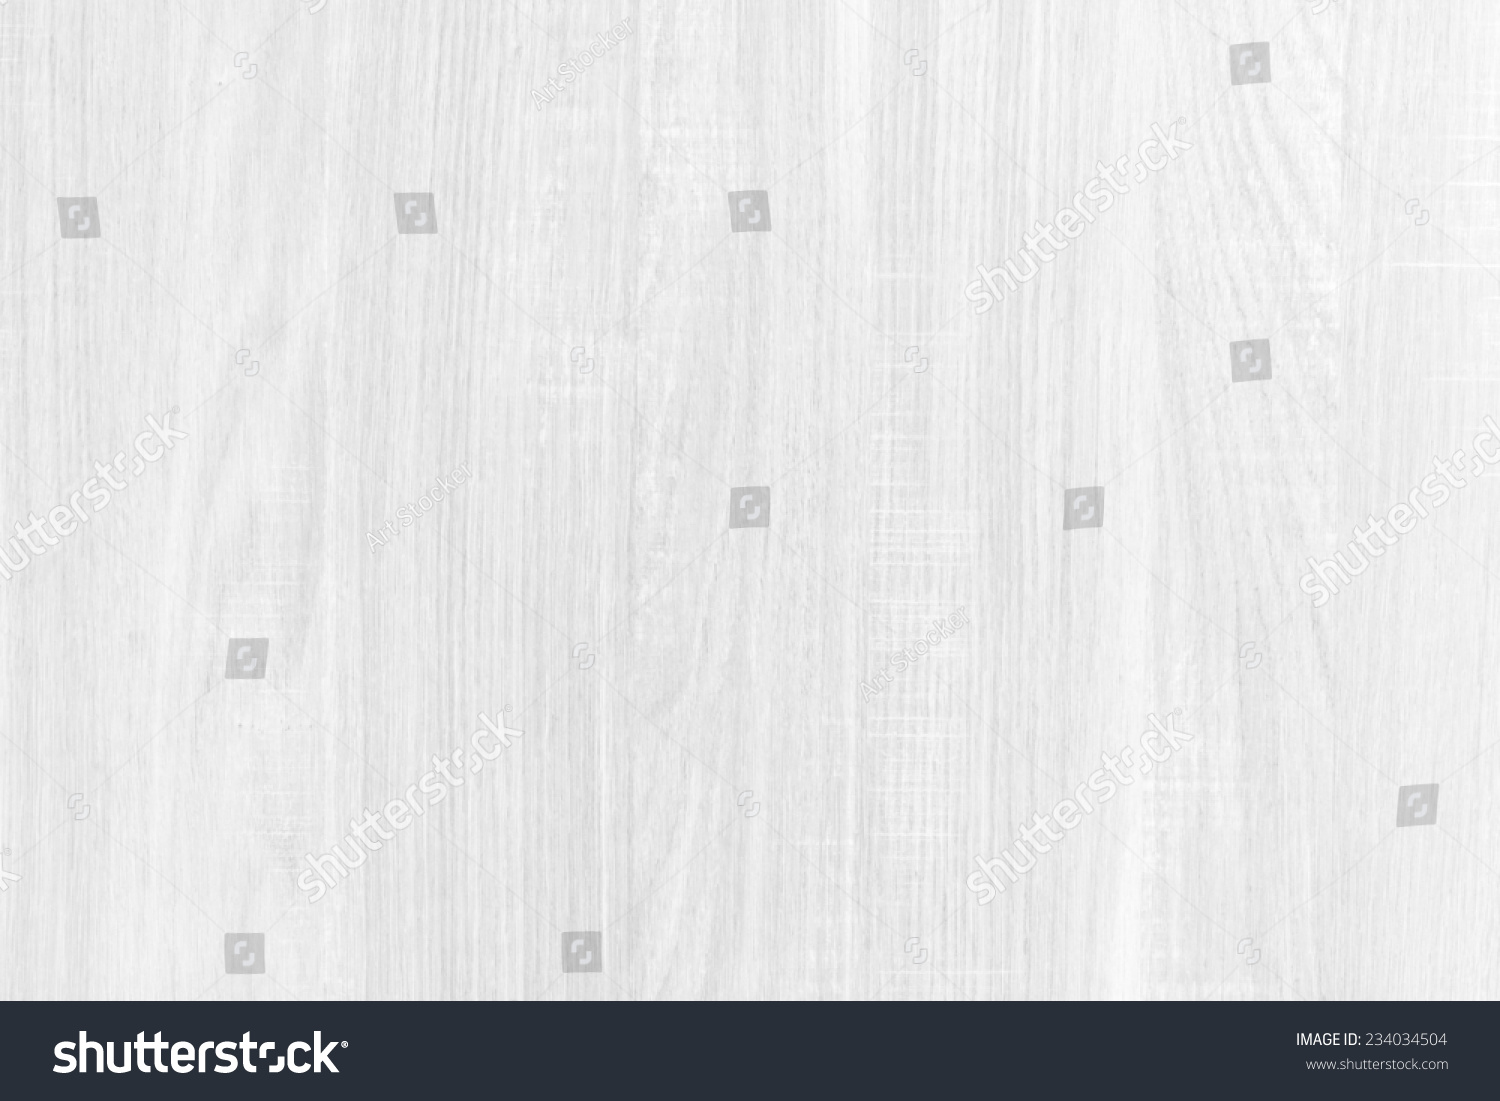 Seamless Clean table top view wood floor texture on white panel pattern shot. Clear grey rustic birch wooden formica home door counter background. Luxury Black grain marble tile plywood bleached.  #234034504